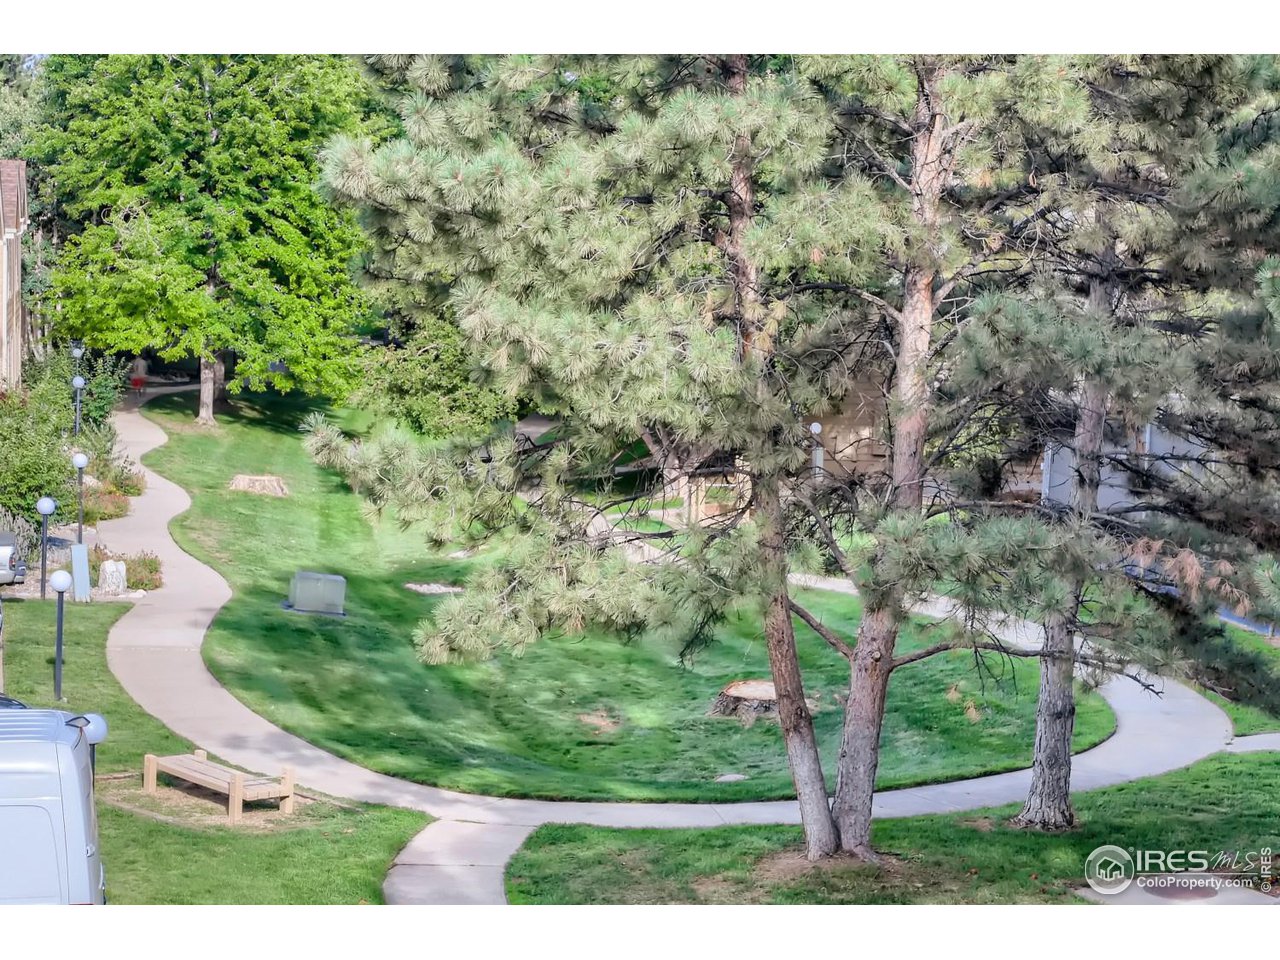 View from the primary bedroom. The path pictured here takes you to the tennis courts, sparkling pool and community park as well as Twin Lakes open space trail system.